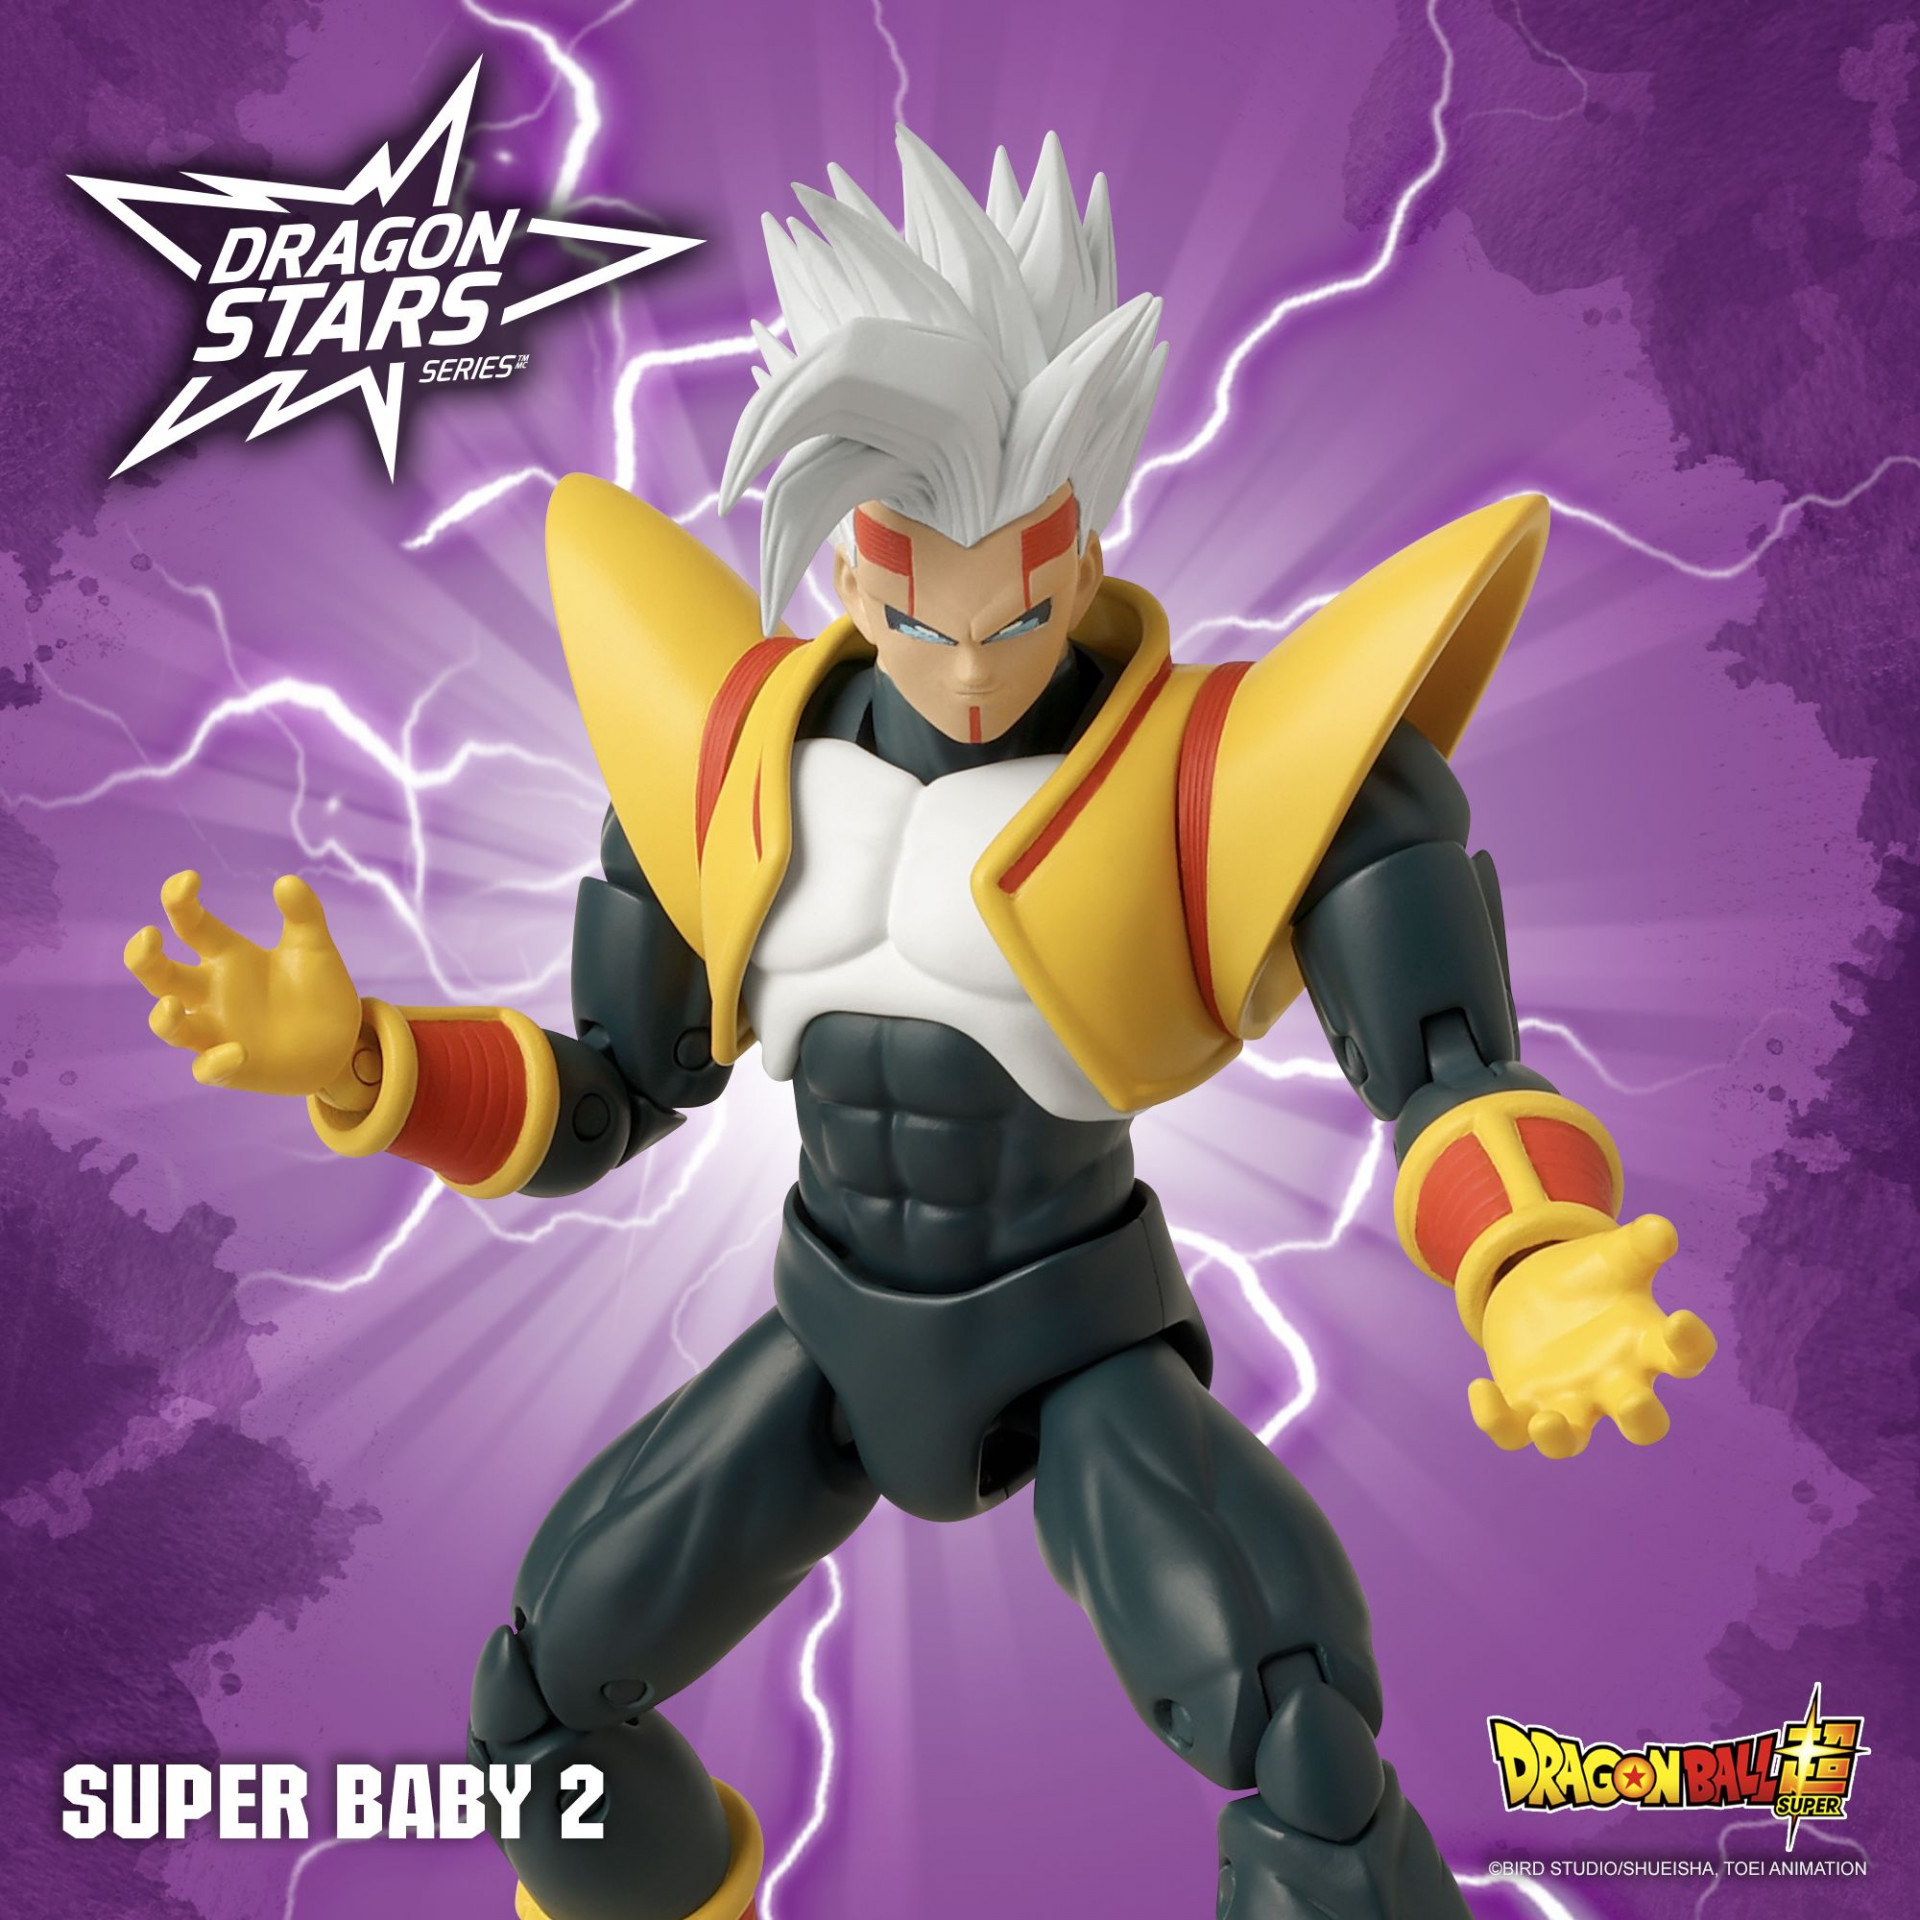 Super Baby 2 Is Coming to the Dragon Stars Series!